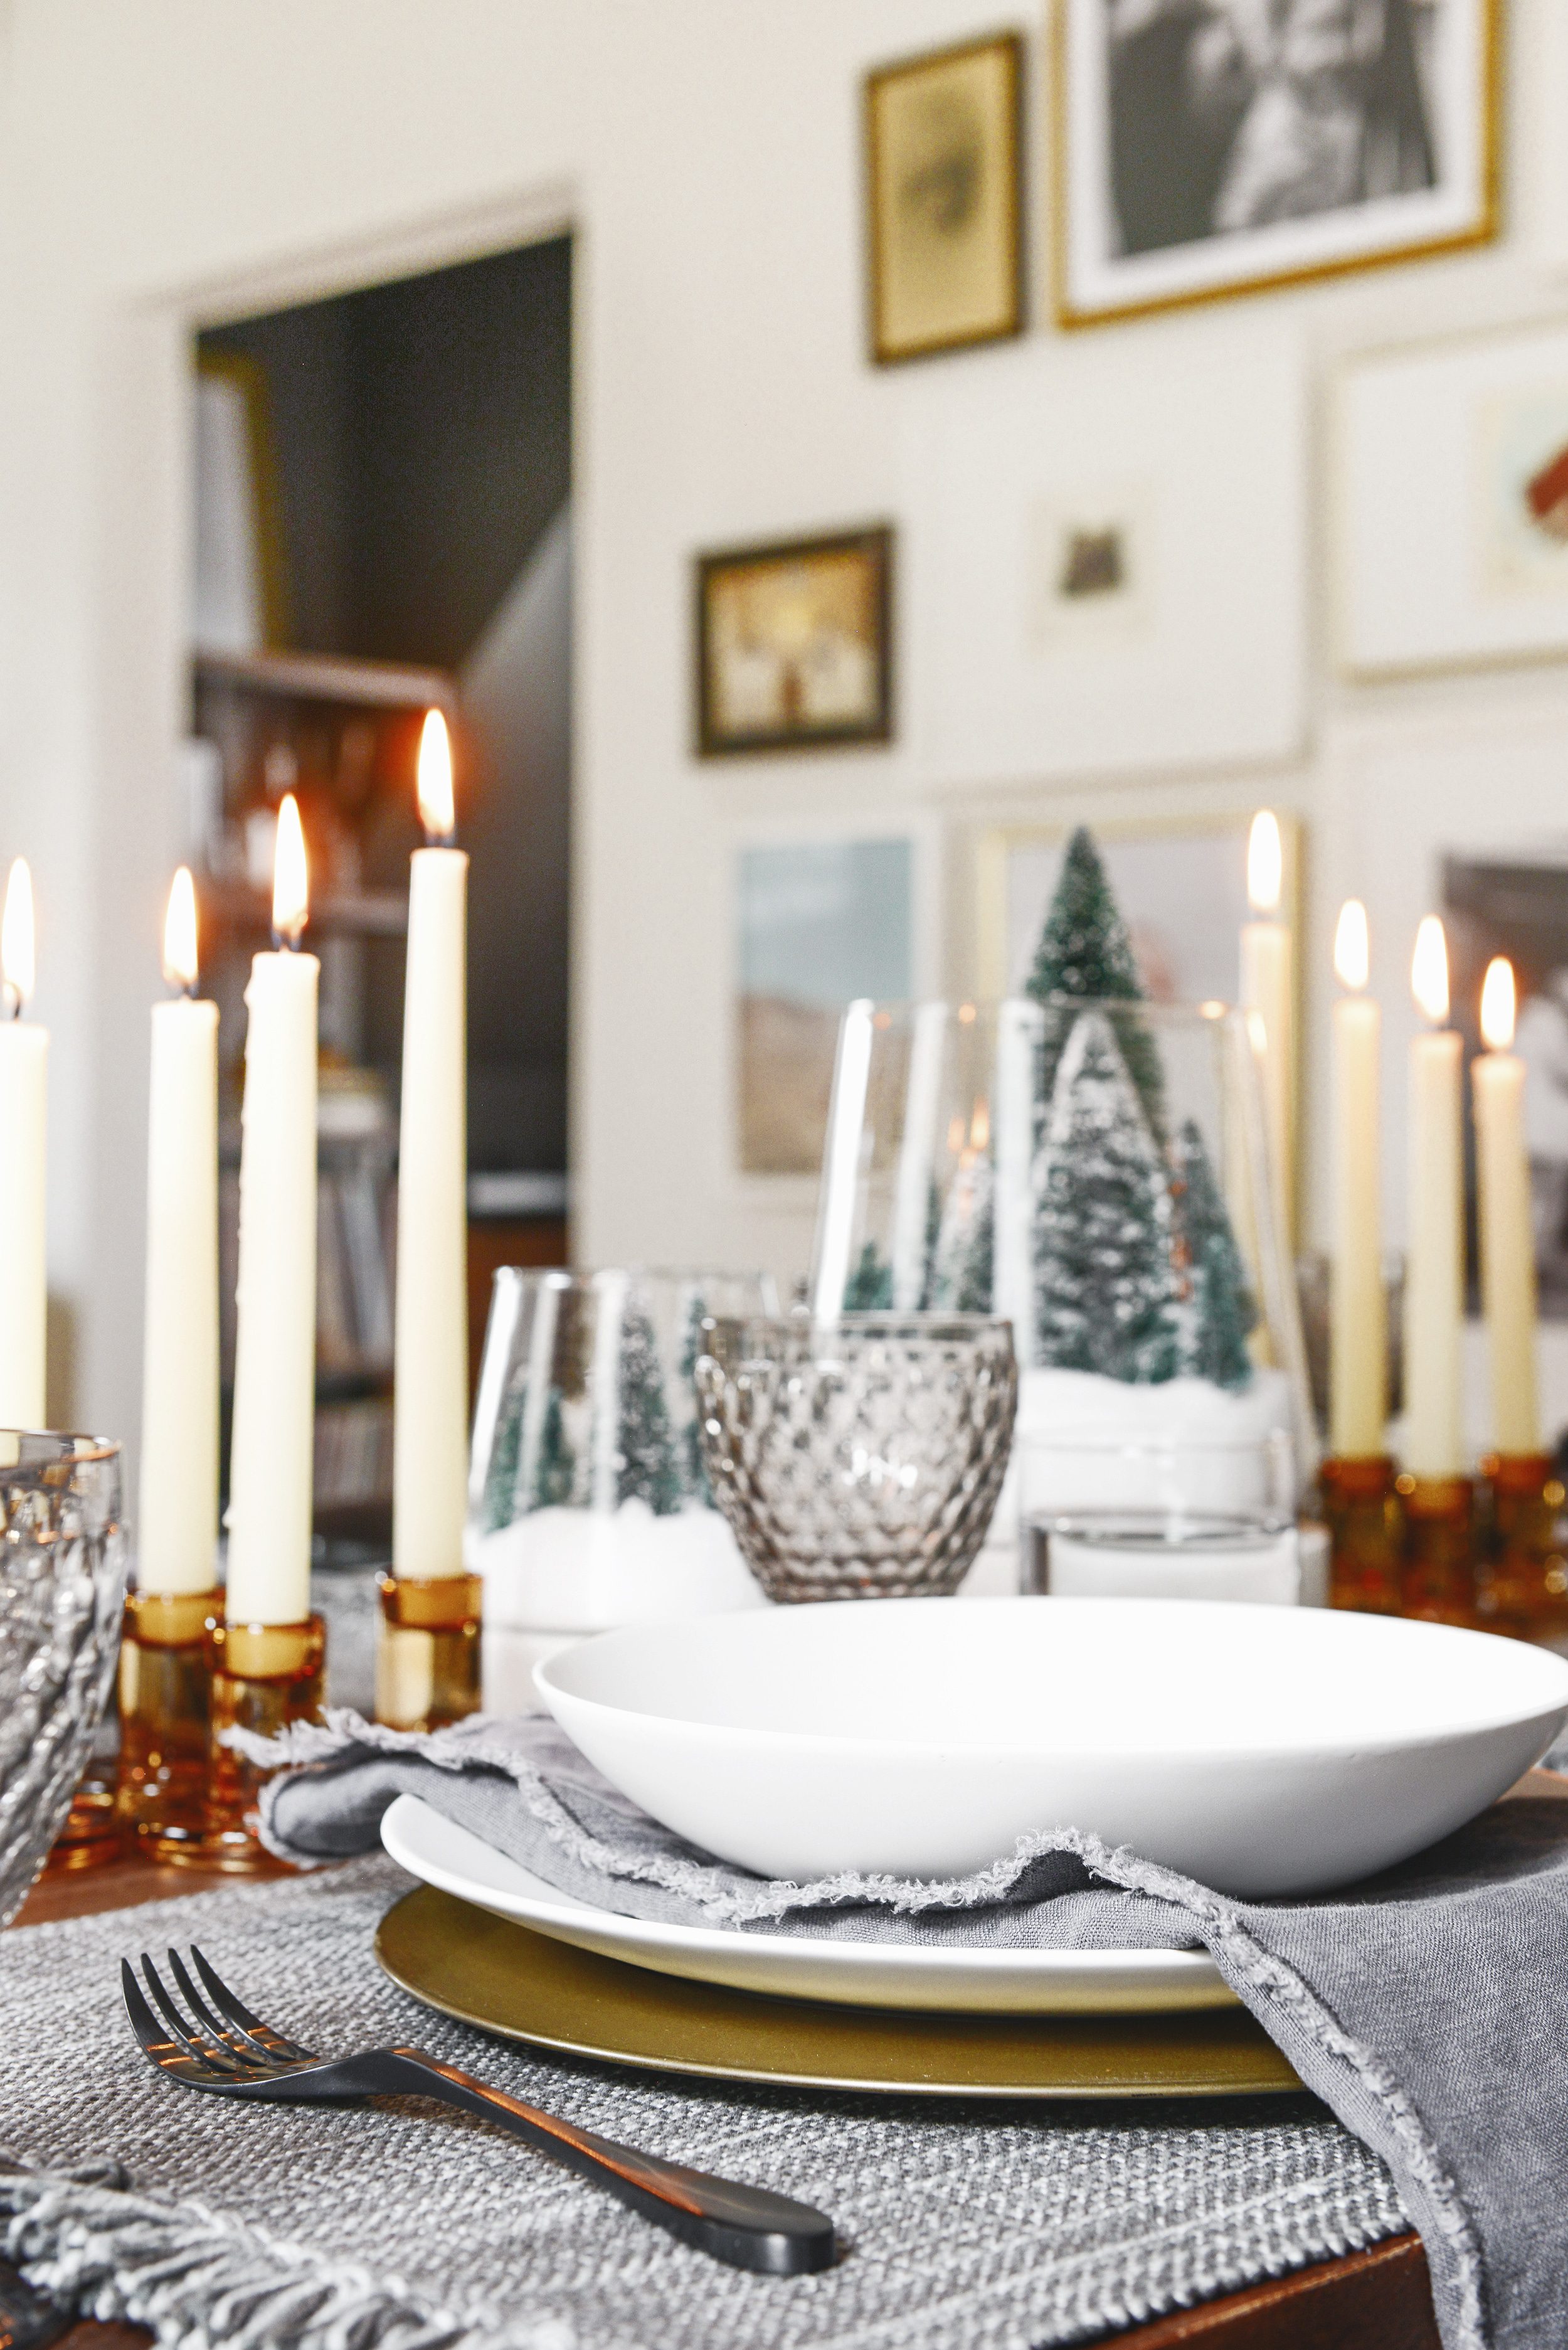 A holiday table setting in shades of grey, amber and white | This holiday season, consider simplifying your table setting with these 5 fresh styling tips! | via Yellow Brick Home